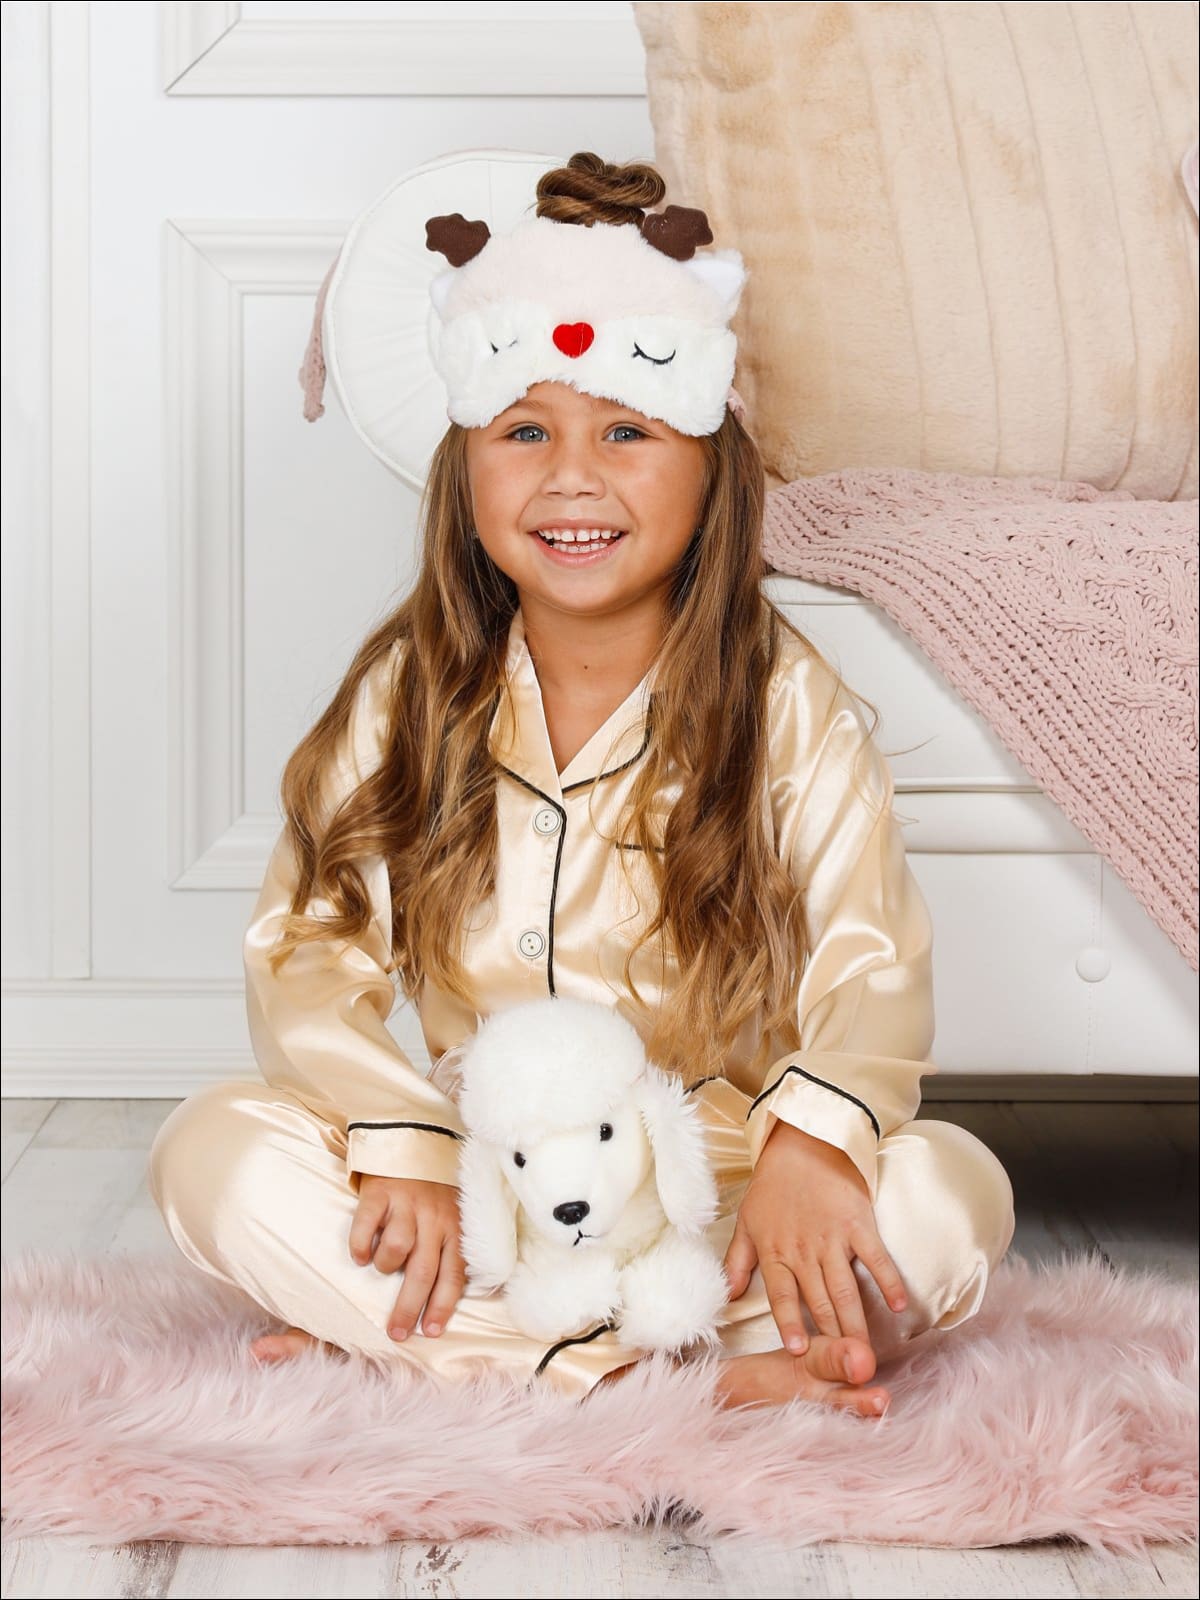 Mia Belle Overseas Fulfillment Mommy and Me Pajamas Sets | Long Sleeve Pajamas - Mia Belle Girls Pink / 2T/3T